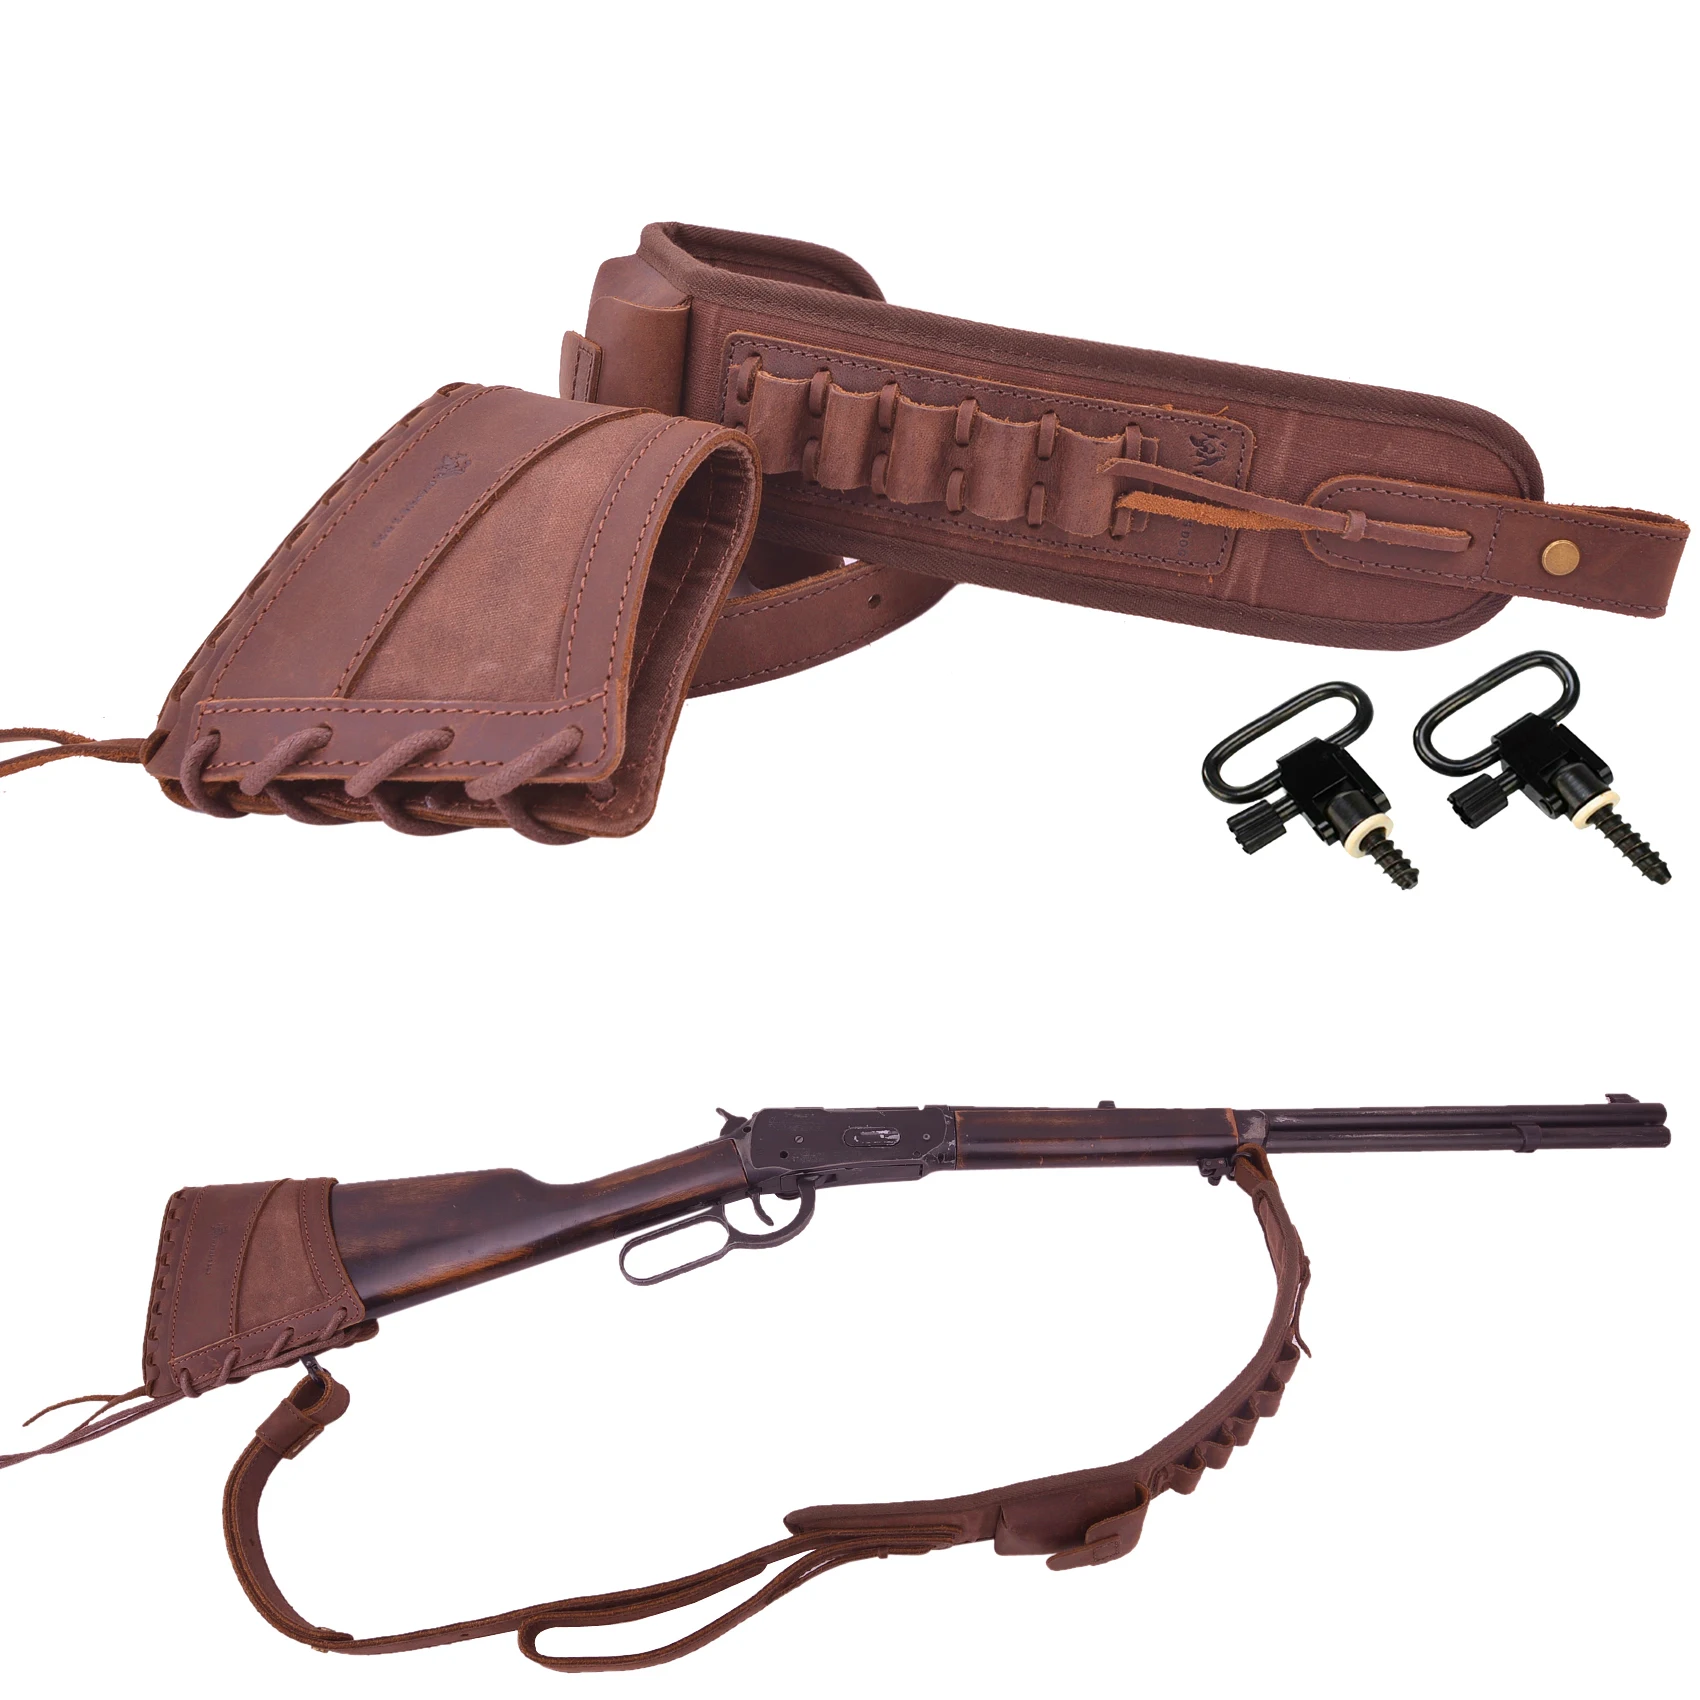 

1 Set Leather Rifle Buttstock Recoil Pad with Gun Carry Sling+Swivels For .308 .30/06 .30/30 .357 .22LR 12GA 16GA 20GA